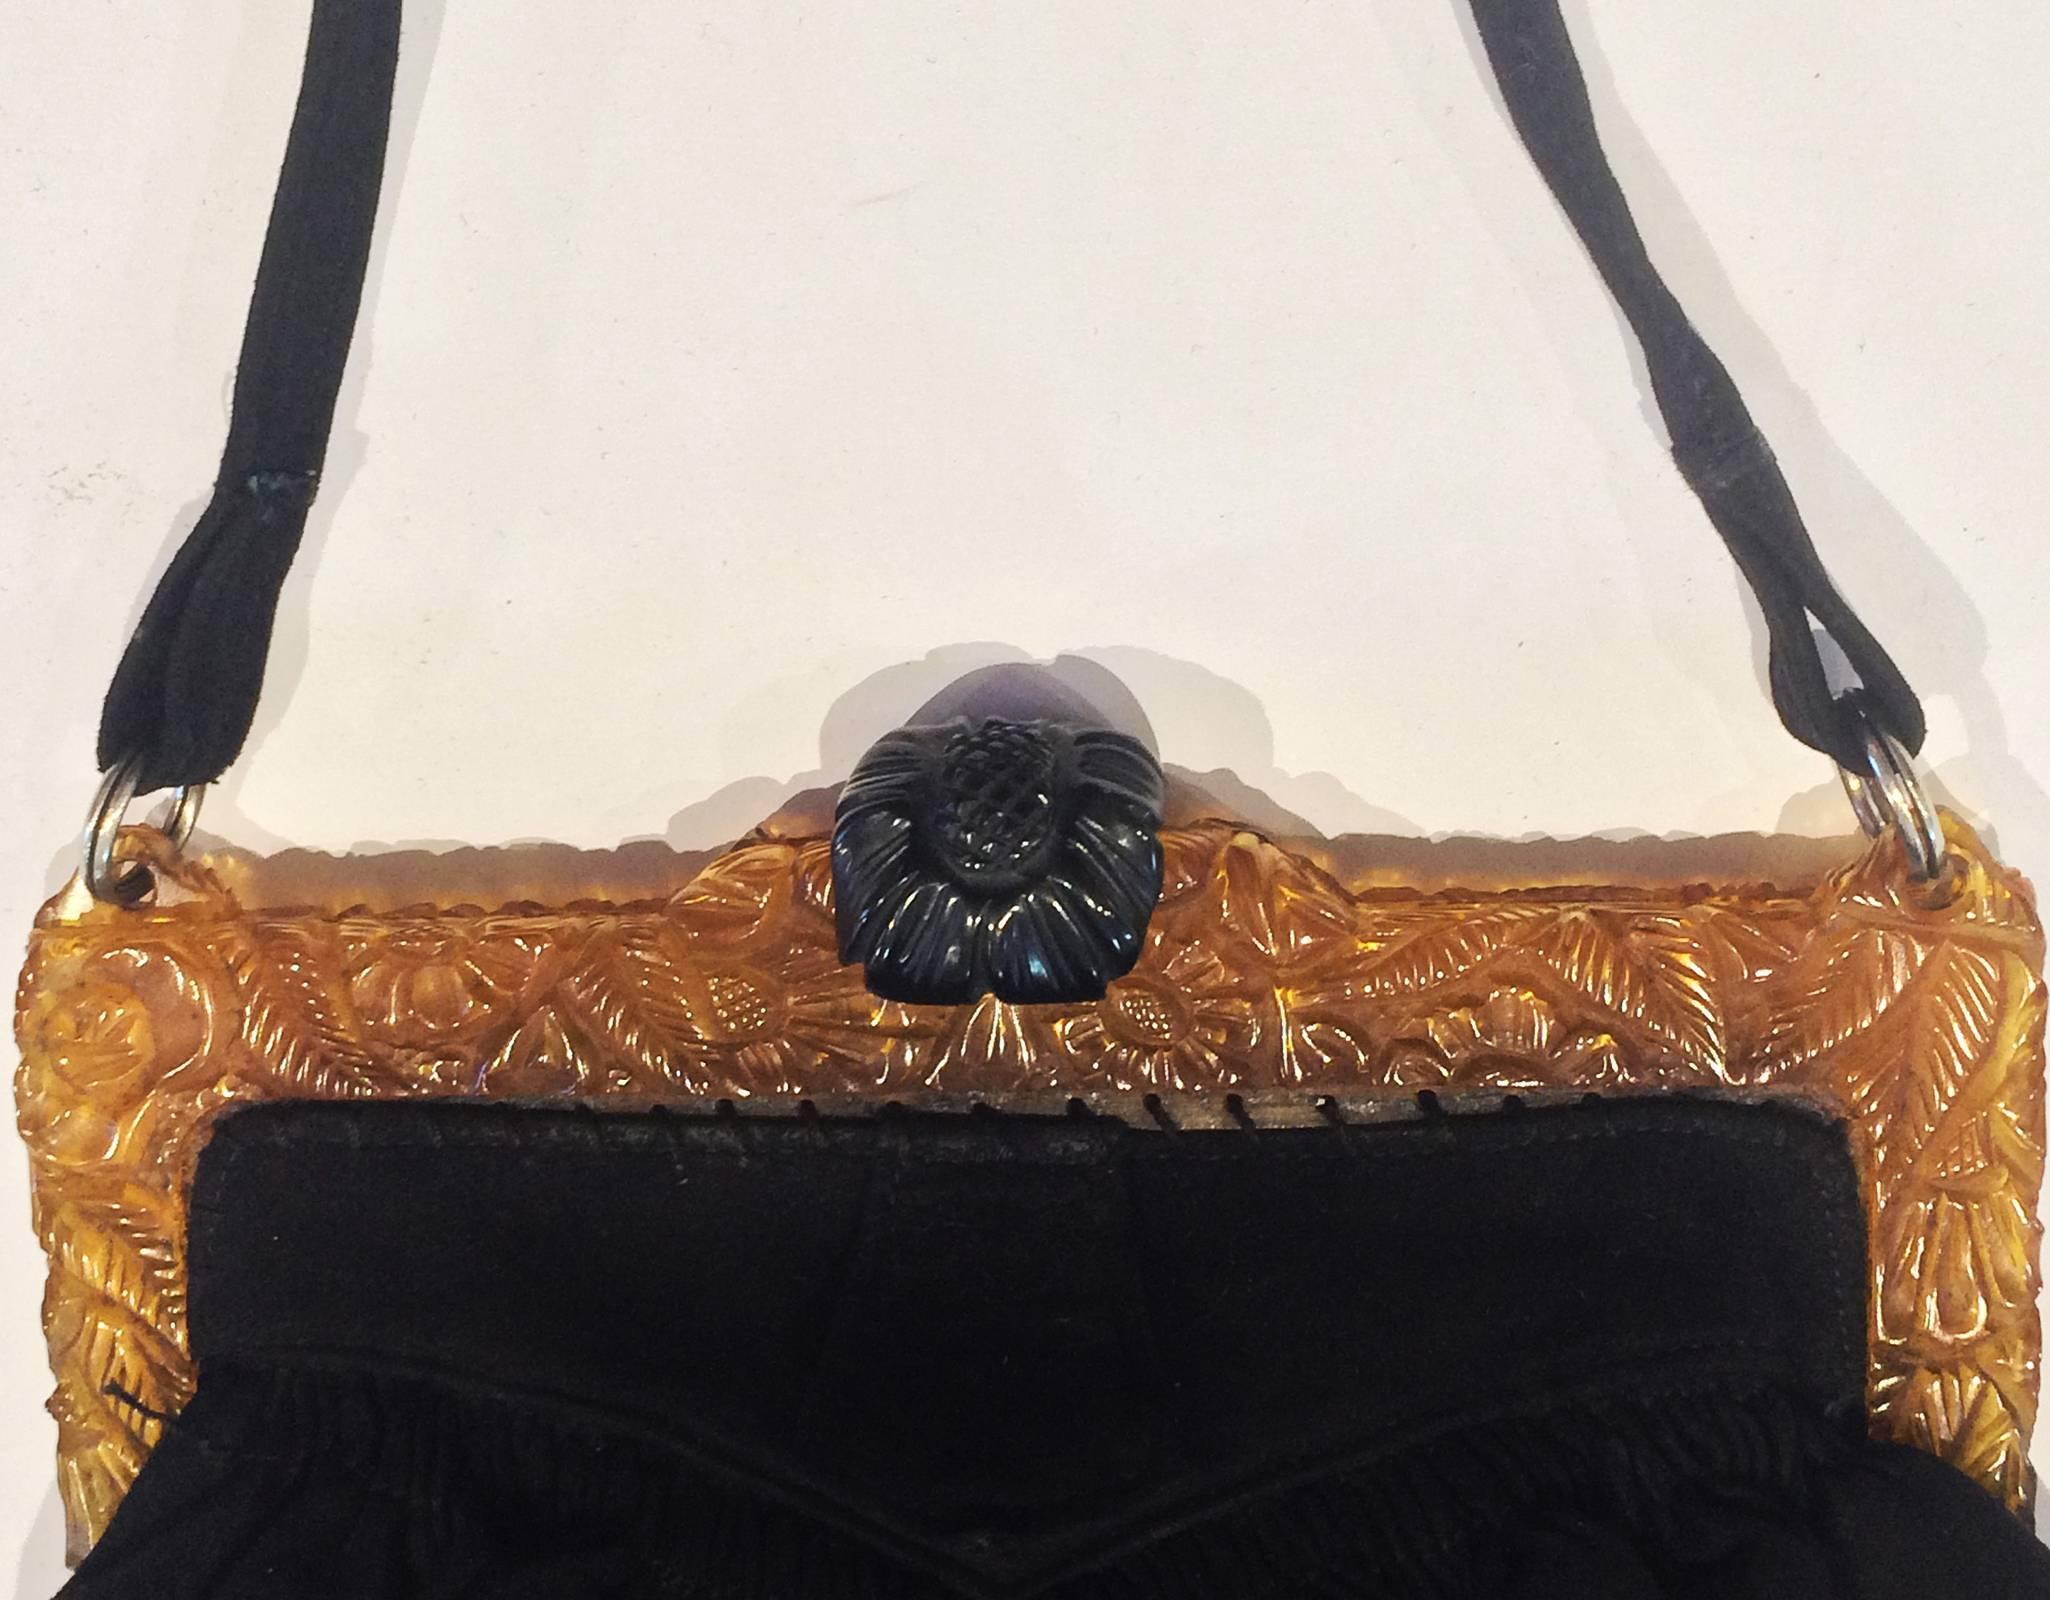 Art Deco, Rare black Suede Handbag, with carved Apple juice Bakelite Frame and Black Bakelite clasp, all finely and deep carved flowers and large Daisy to the black Bakelite. Chrome rings to handle and clasp mechanicals. Interior is lined in silk